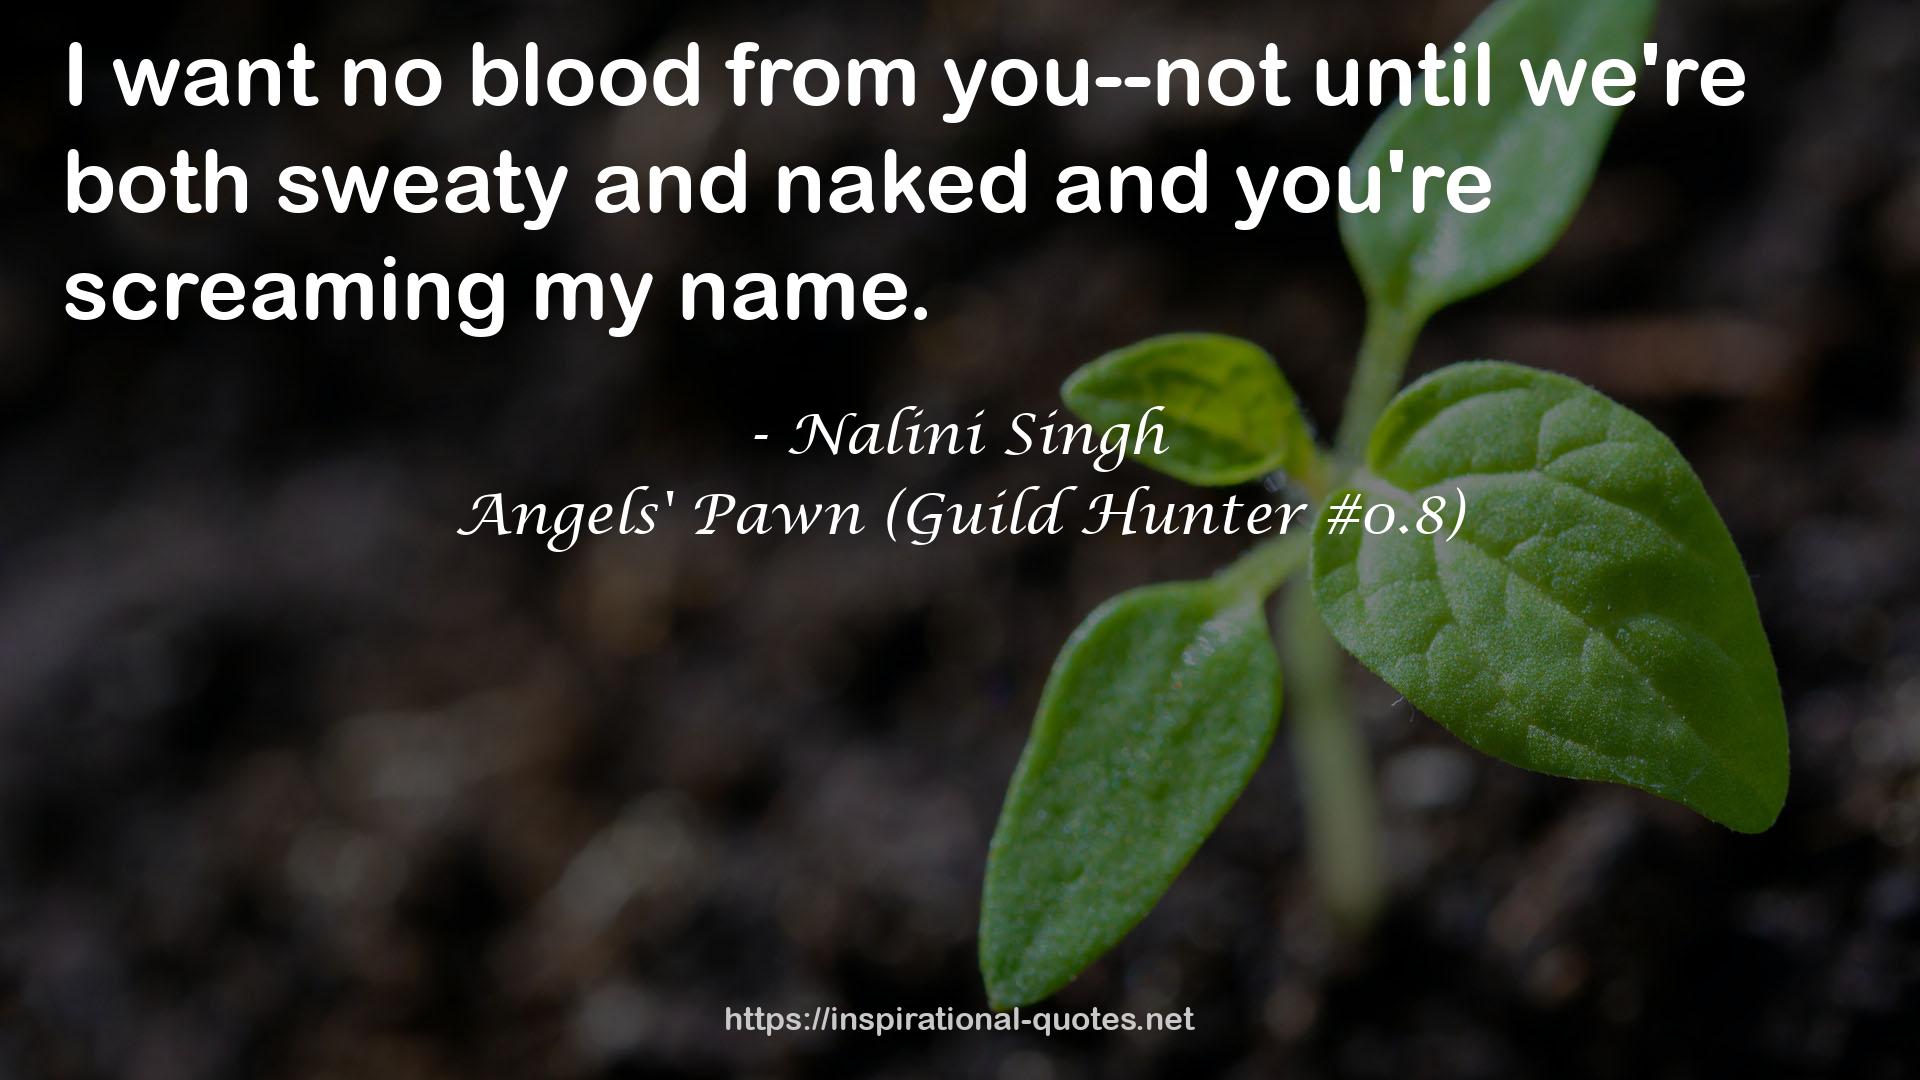 Angels' Pawn (Guild Hunter #0.8) QUOTES